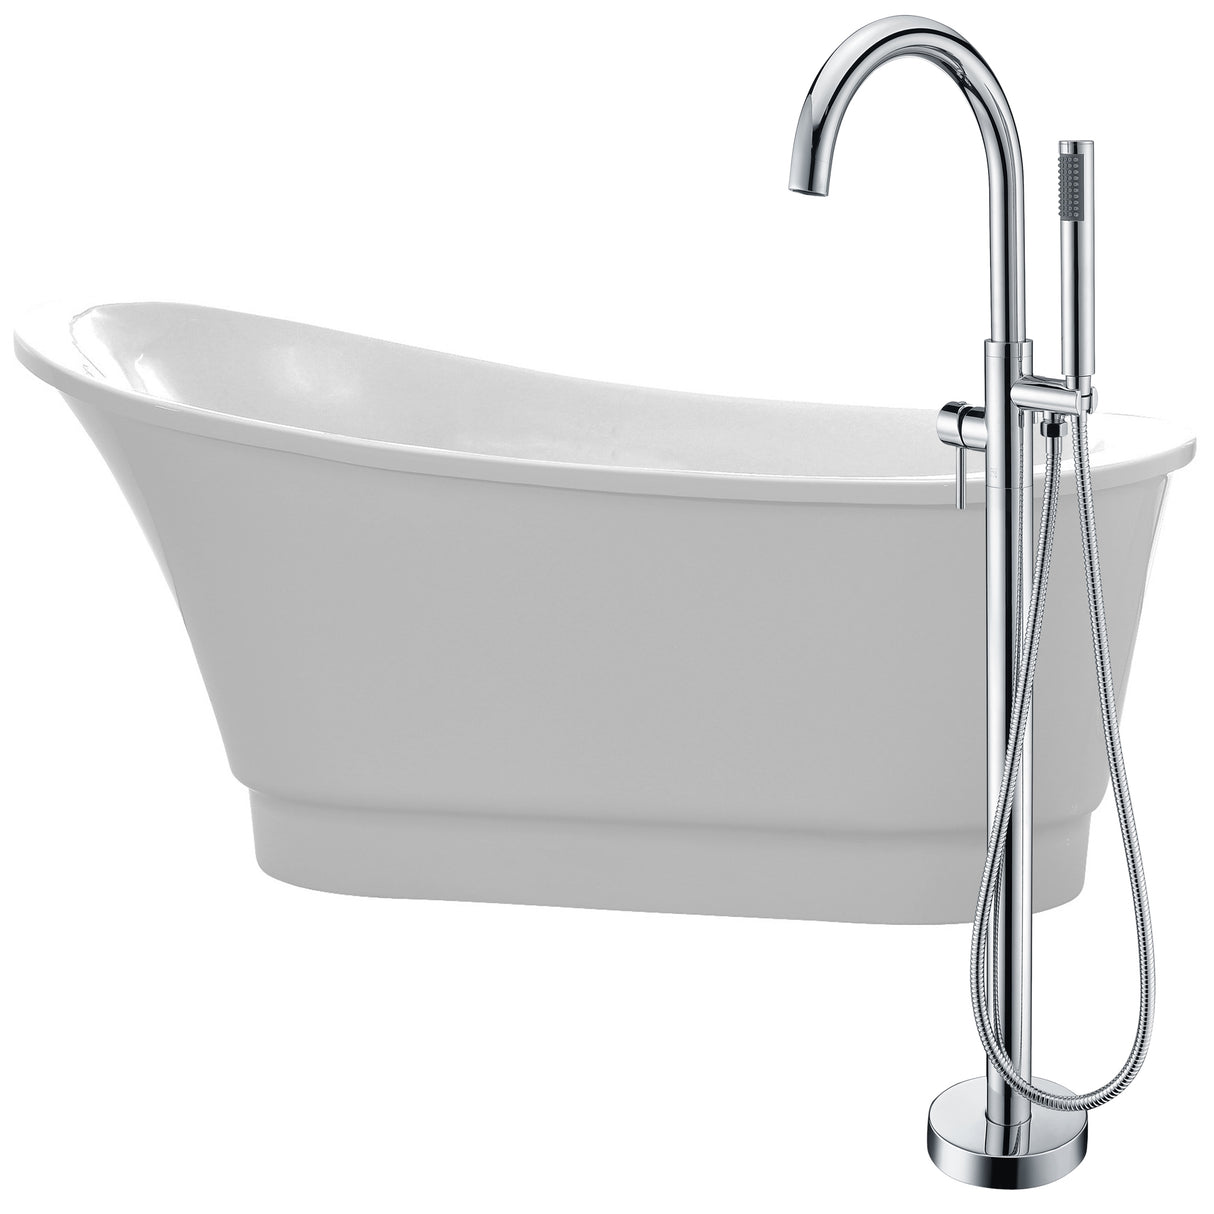 ANZZI FTAZ095-0025C Prima 67 in. Acrylic Flatbottom Non-Whirlpool Bathtub in White with Kros Faucet in Polished Chrome